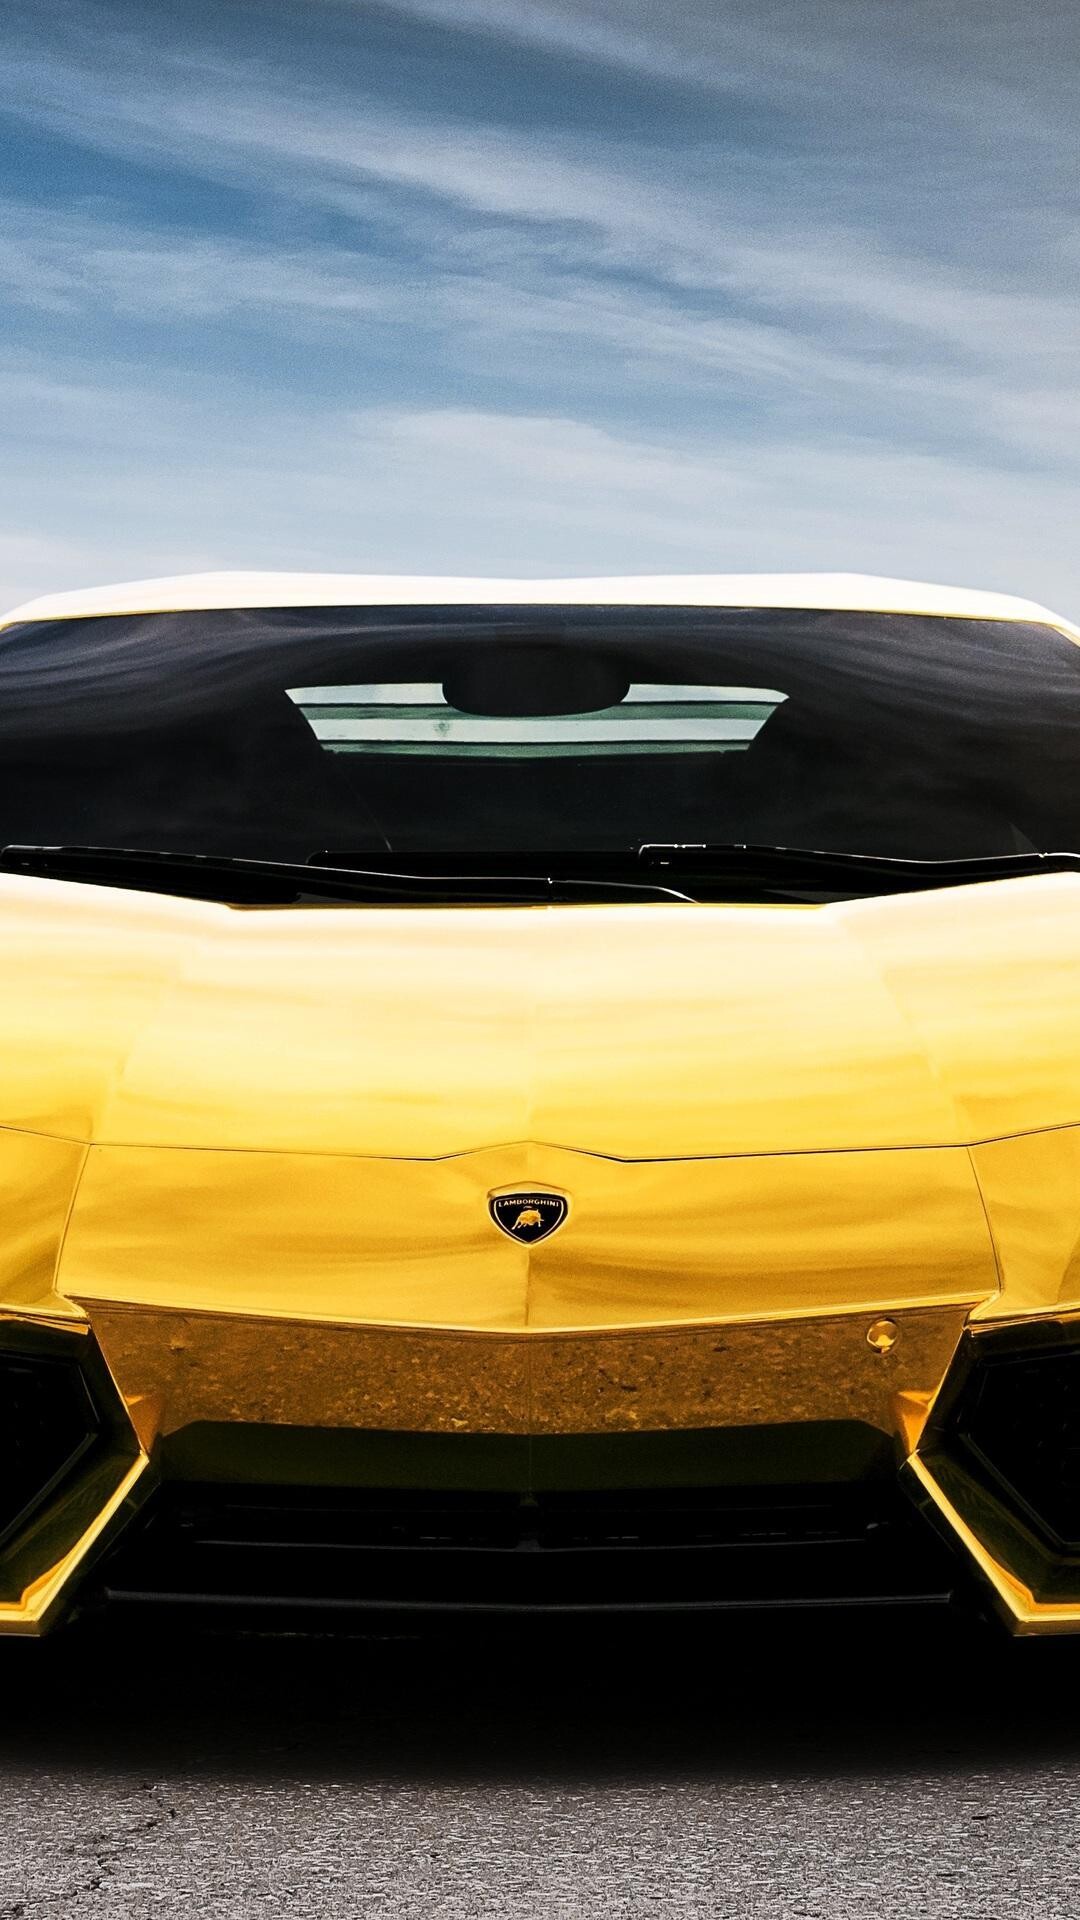 Gold Lamborghini: The front view of the Aventador LP 700 model, The first iteration of the Aventador. 1080x1920 Full HD Background.